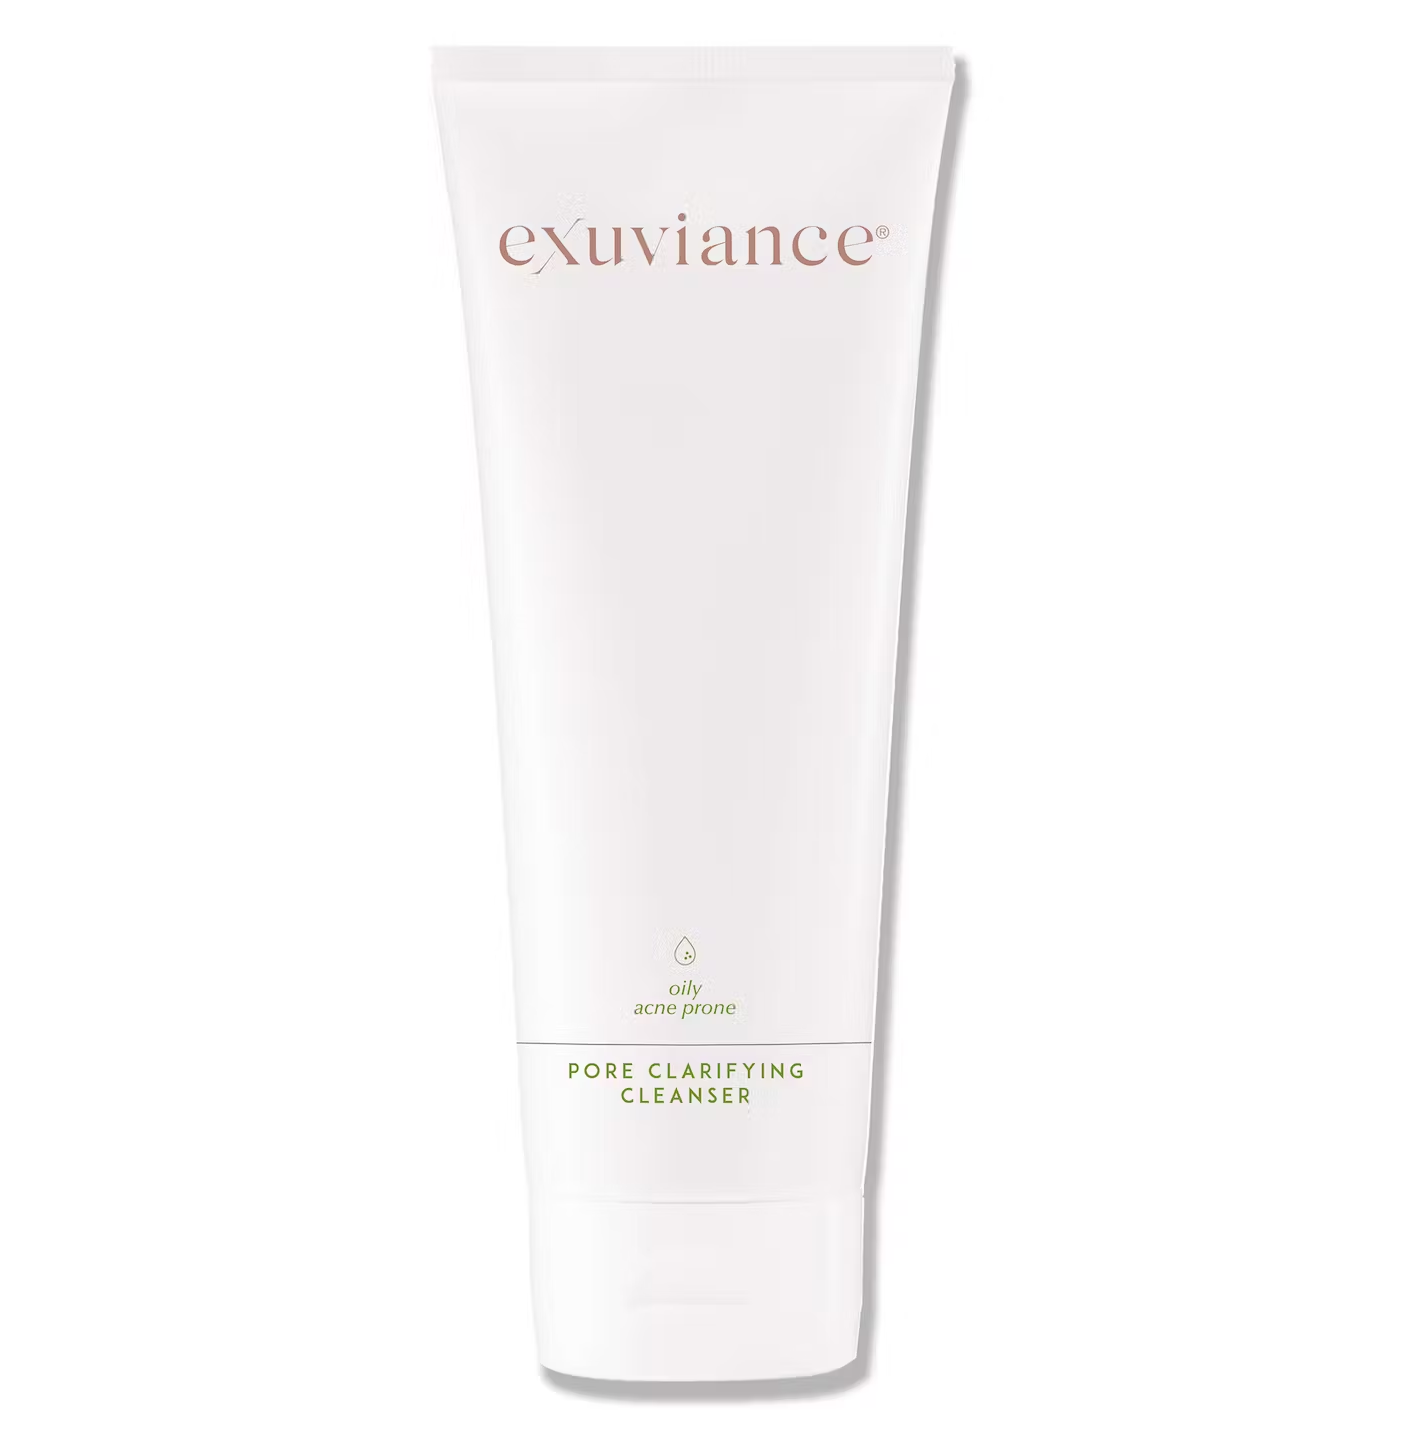 Se Exuviance Pore Clarifying Cleanser hos Staybeautiful